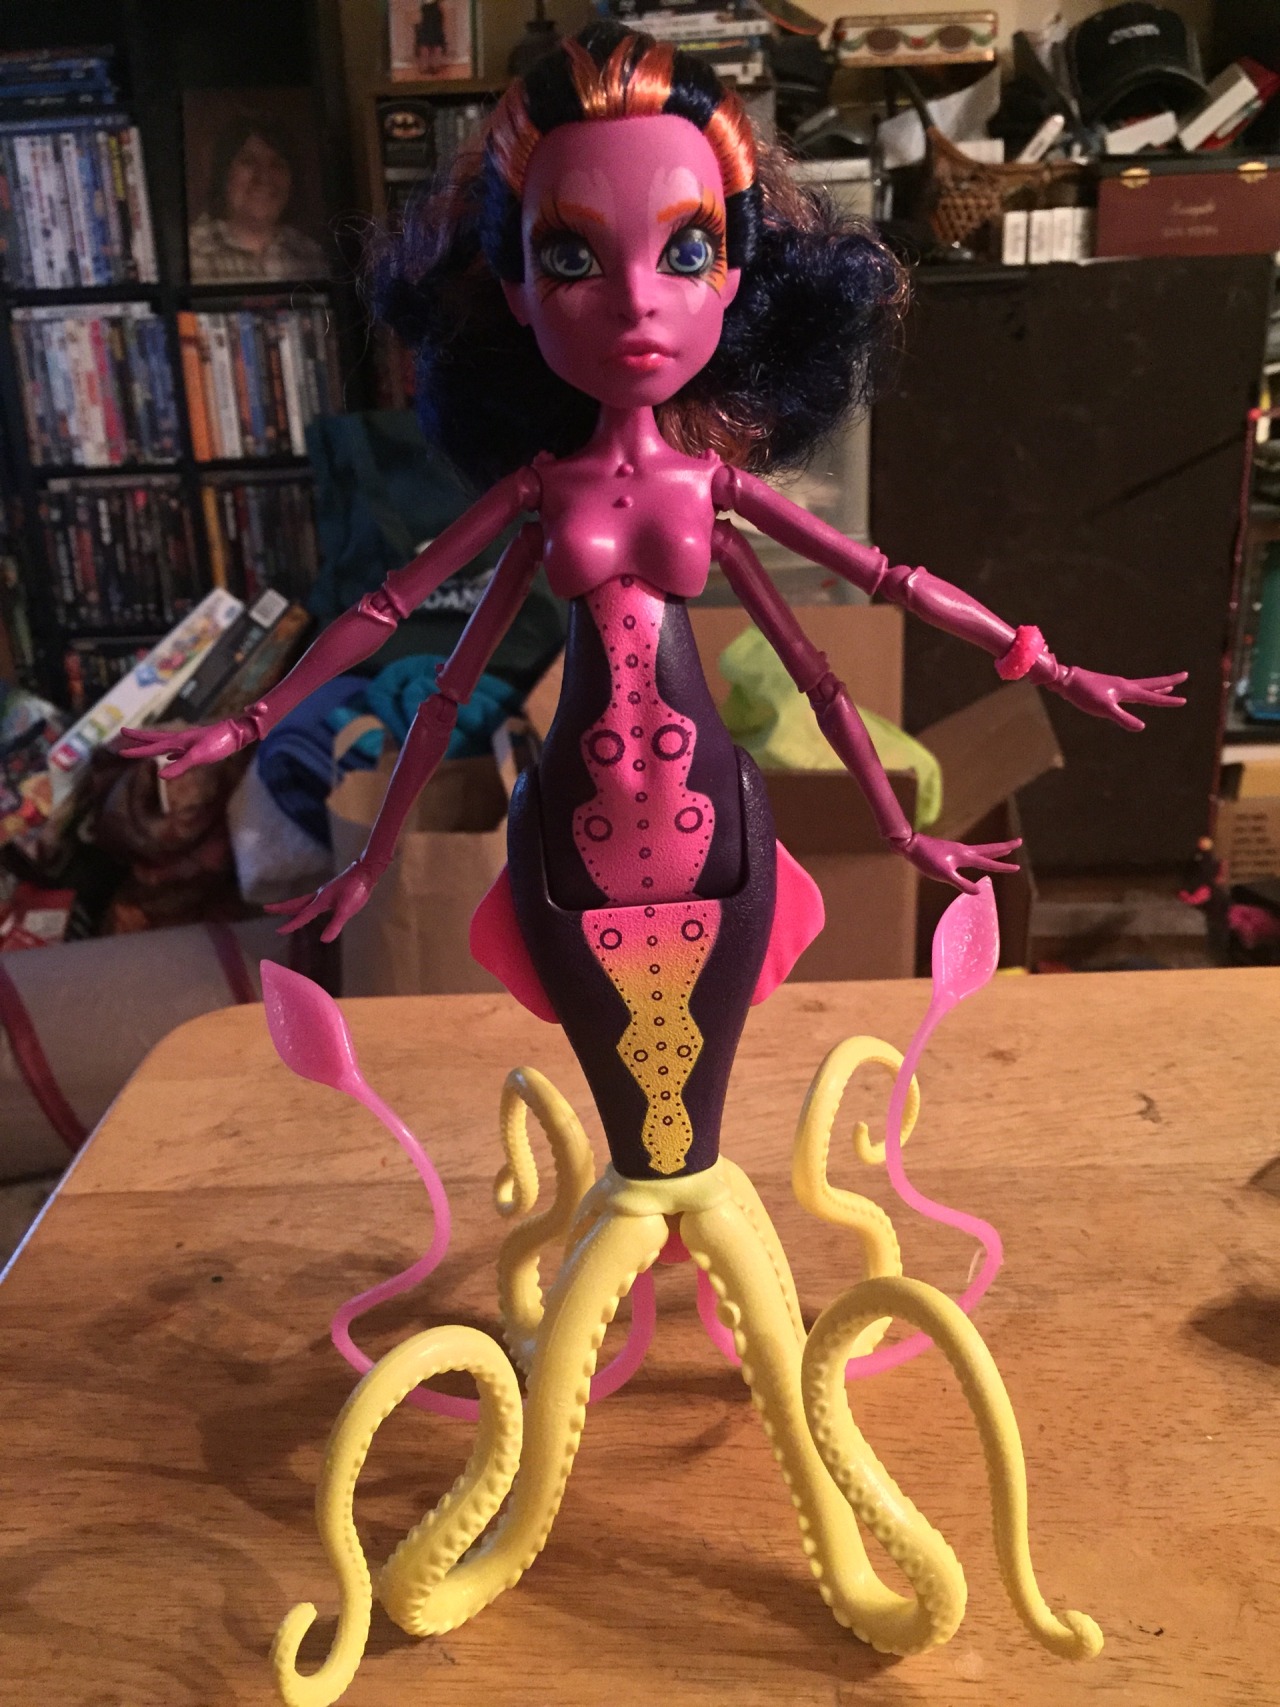 oswinsadventures:

fangtastic-doll-refs:

Here is Kala Mer'ri! There’s a lot of detail on this doll, I love it! She has little suckers on all of her hands, but I chose a picture showing the best defined hands. I also included a body profile pic to show her little tummy pudge. I know it’s so her body curves the same way as other dolls, but I think it’s really cute on her! One thing though, the spikes on her arm means I can’t take the one bracelet off her, which is a little strange. Be careful putting you’re own bracelets on her, they might not be able to come off!
Up next is Kala’s outfit and accessories!

I didnt notice the suckers on the hands! That rocks!